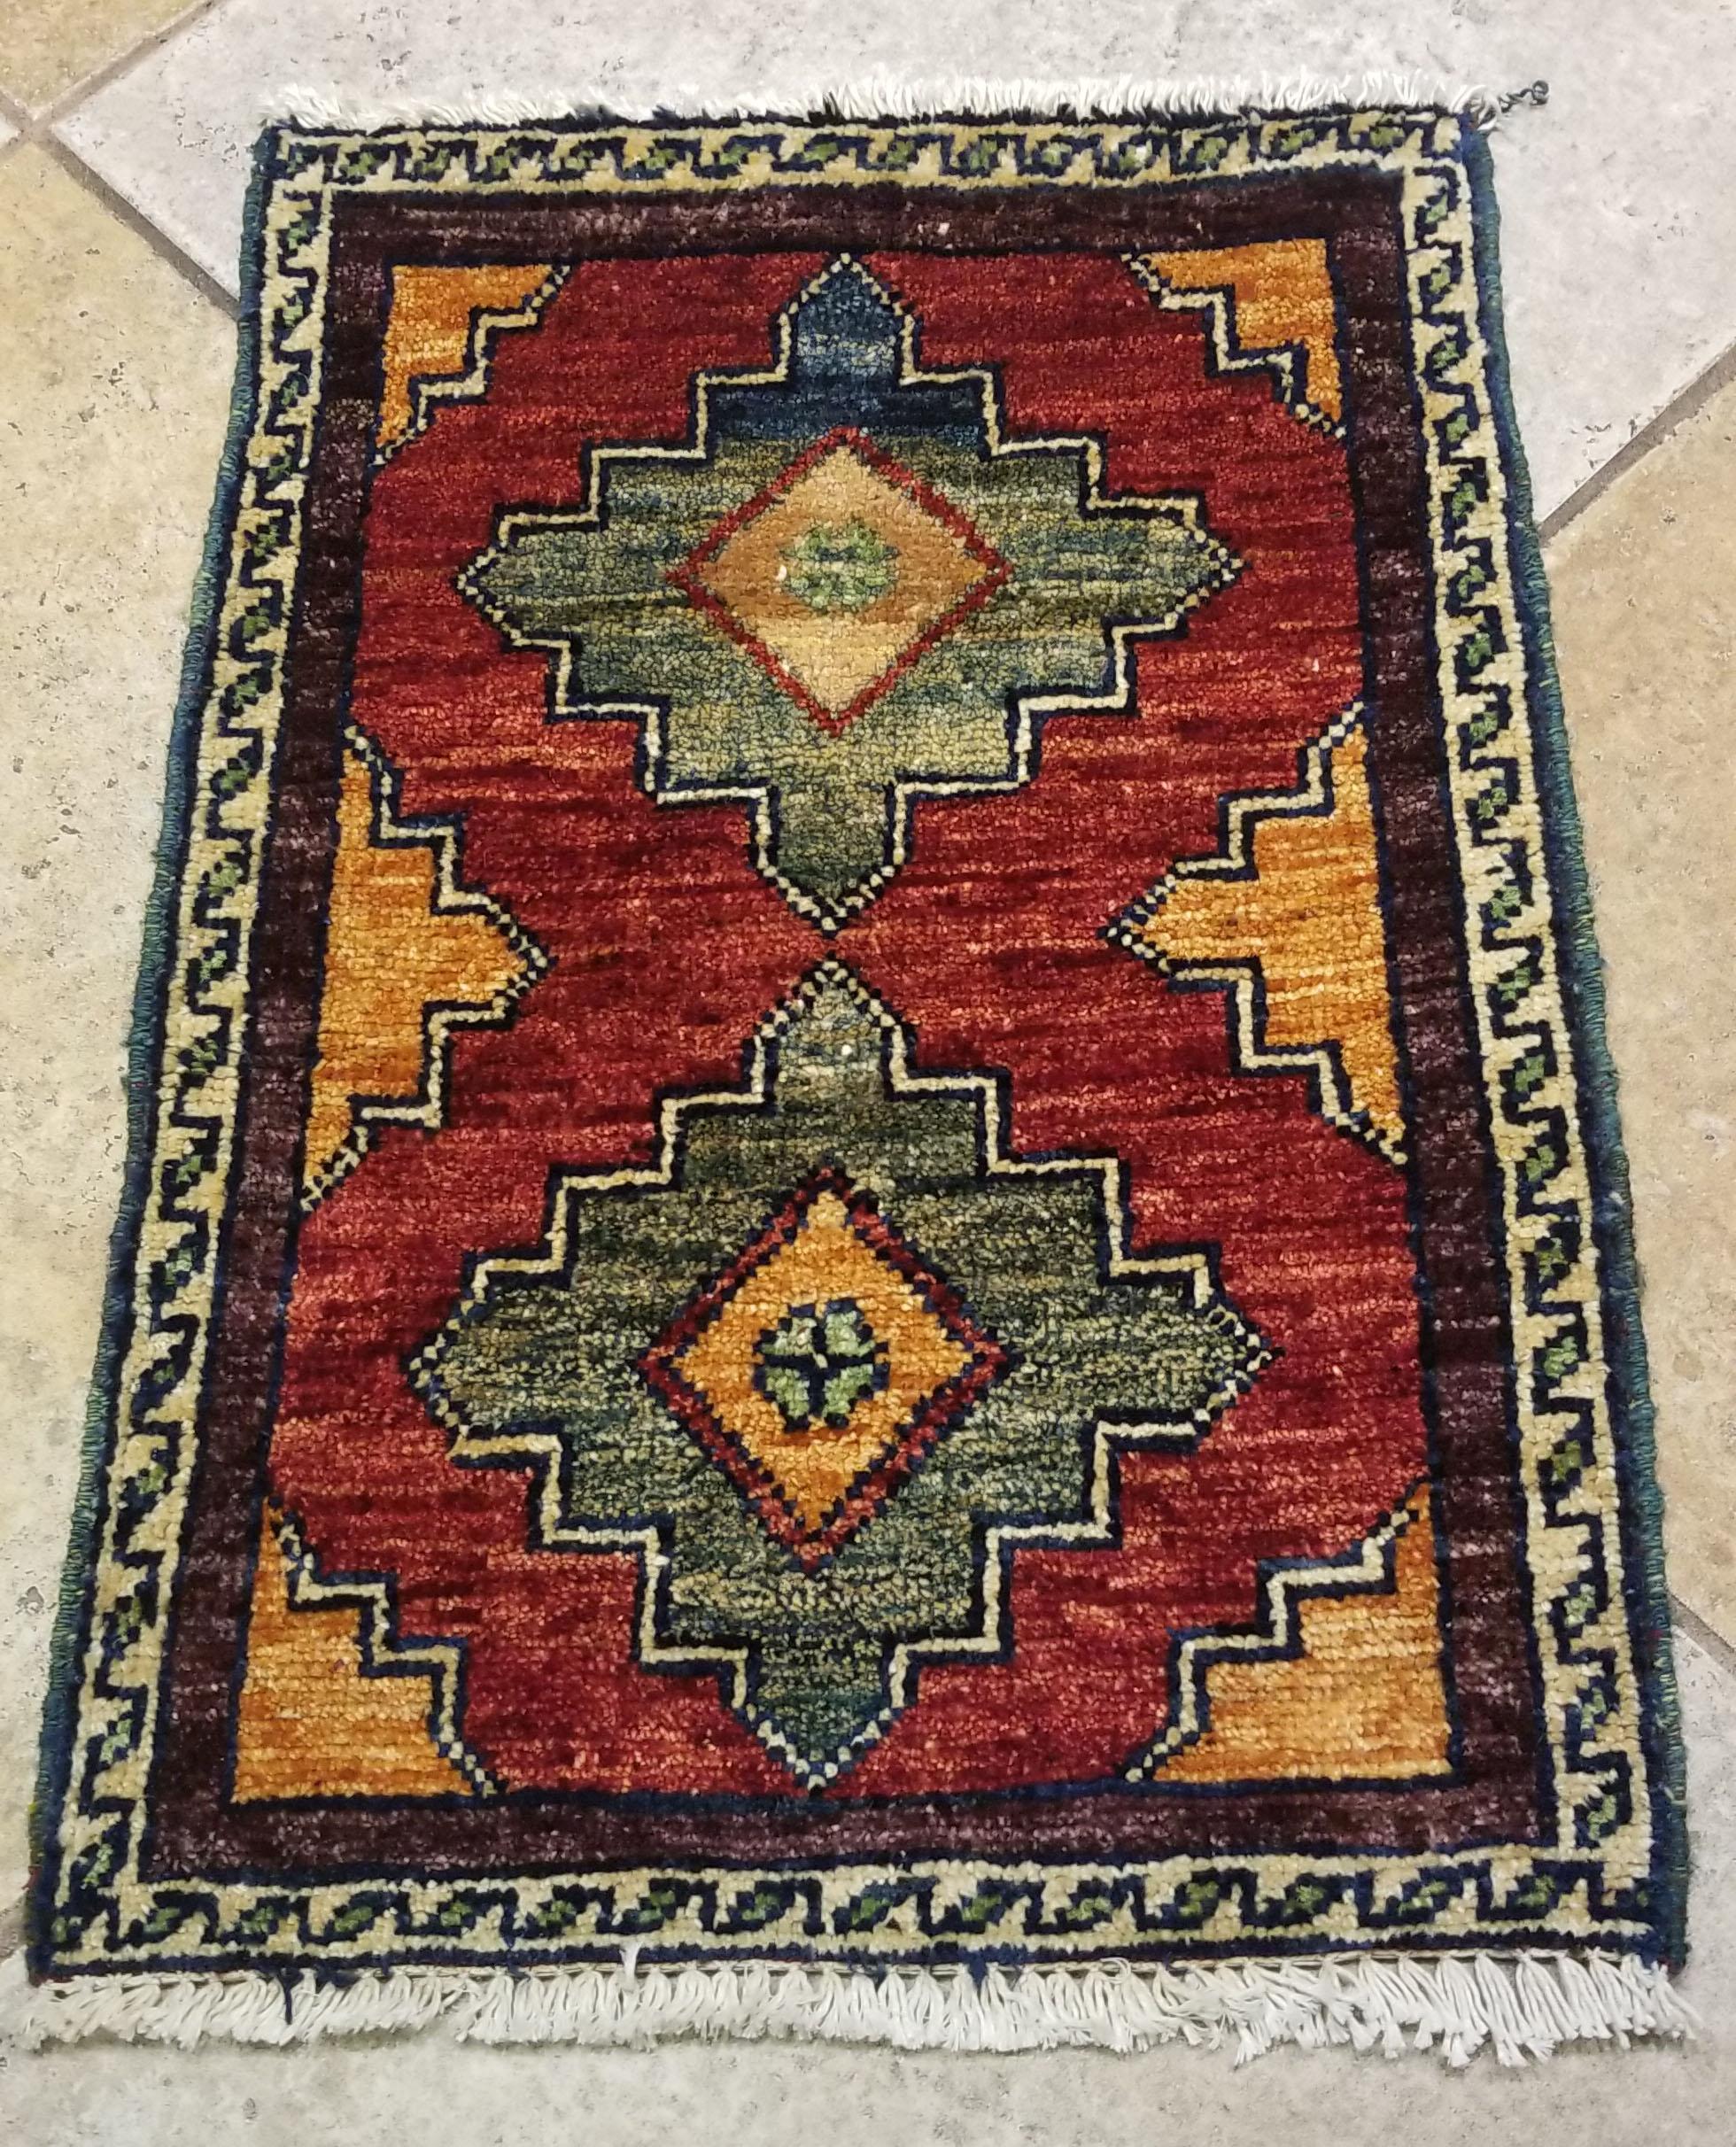 We carry some of the best Afghan bedside rugs, when you like to give your bedroom a colorful new look with one of our stunning carpets. This one measures approximately 26